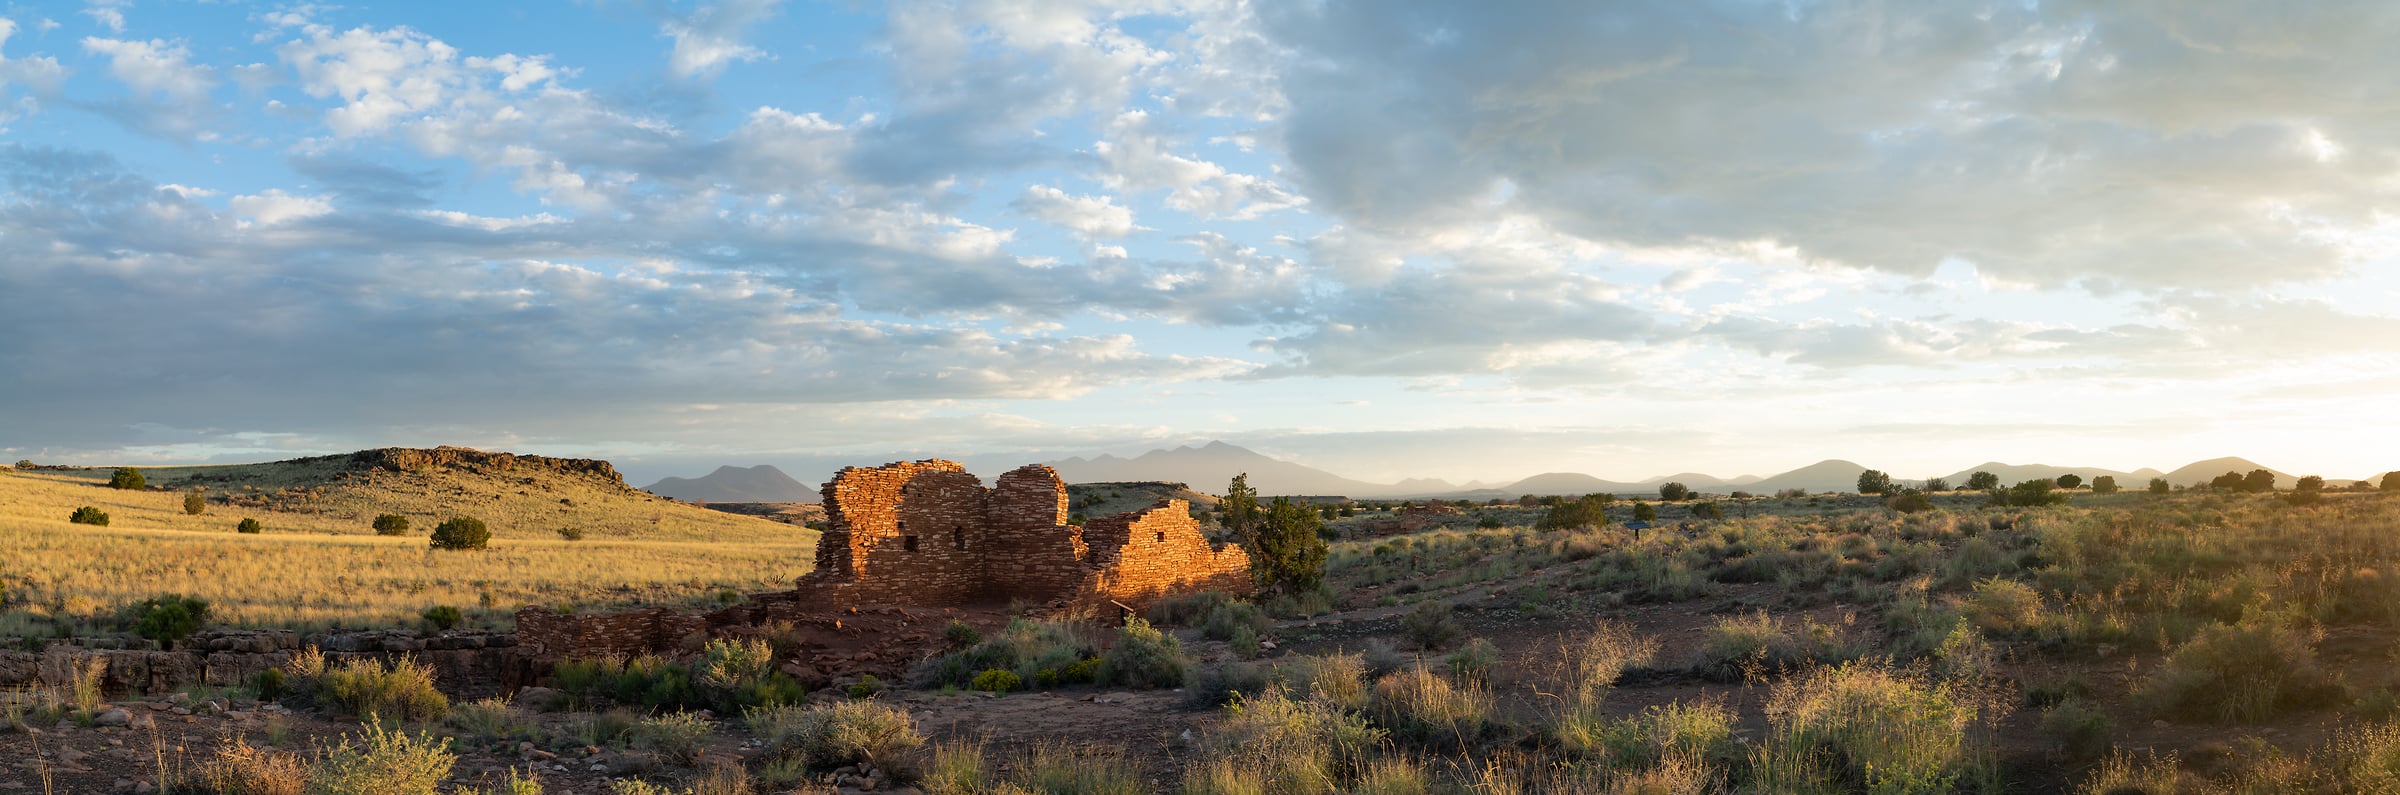 437 megapixels! A very high resolution, large-format VAST photo print of ruins in Box Canyon at sunset; landscape panorama photograph created by Greg Probst in Box Canyon Ruins, Wupatki National Monument, Arizona.